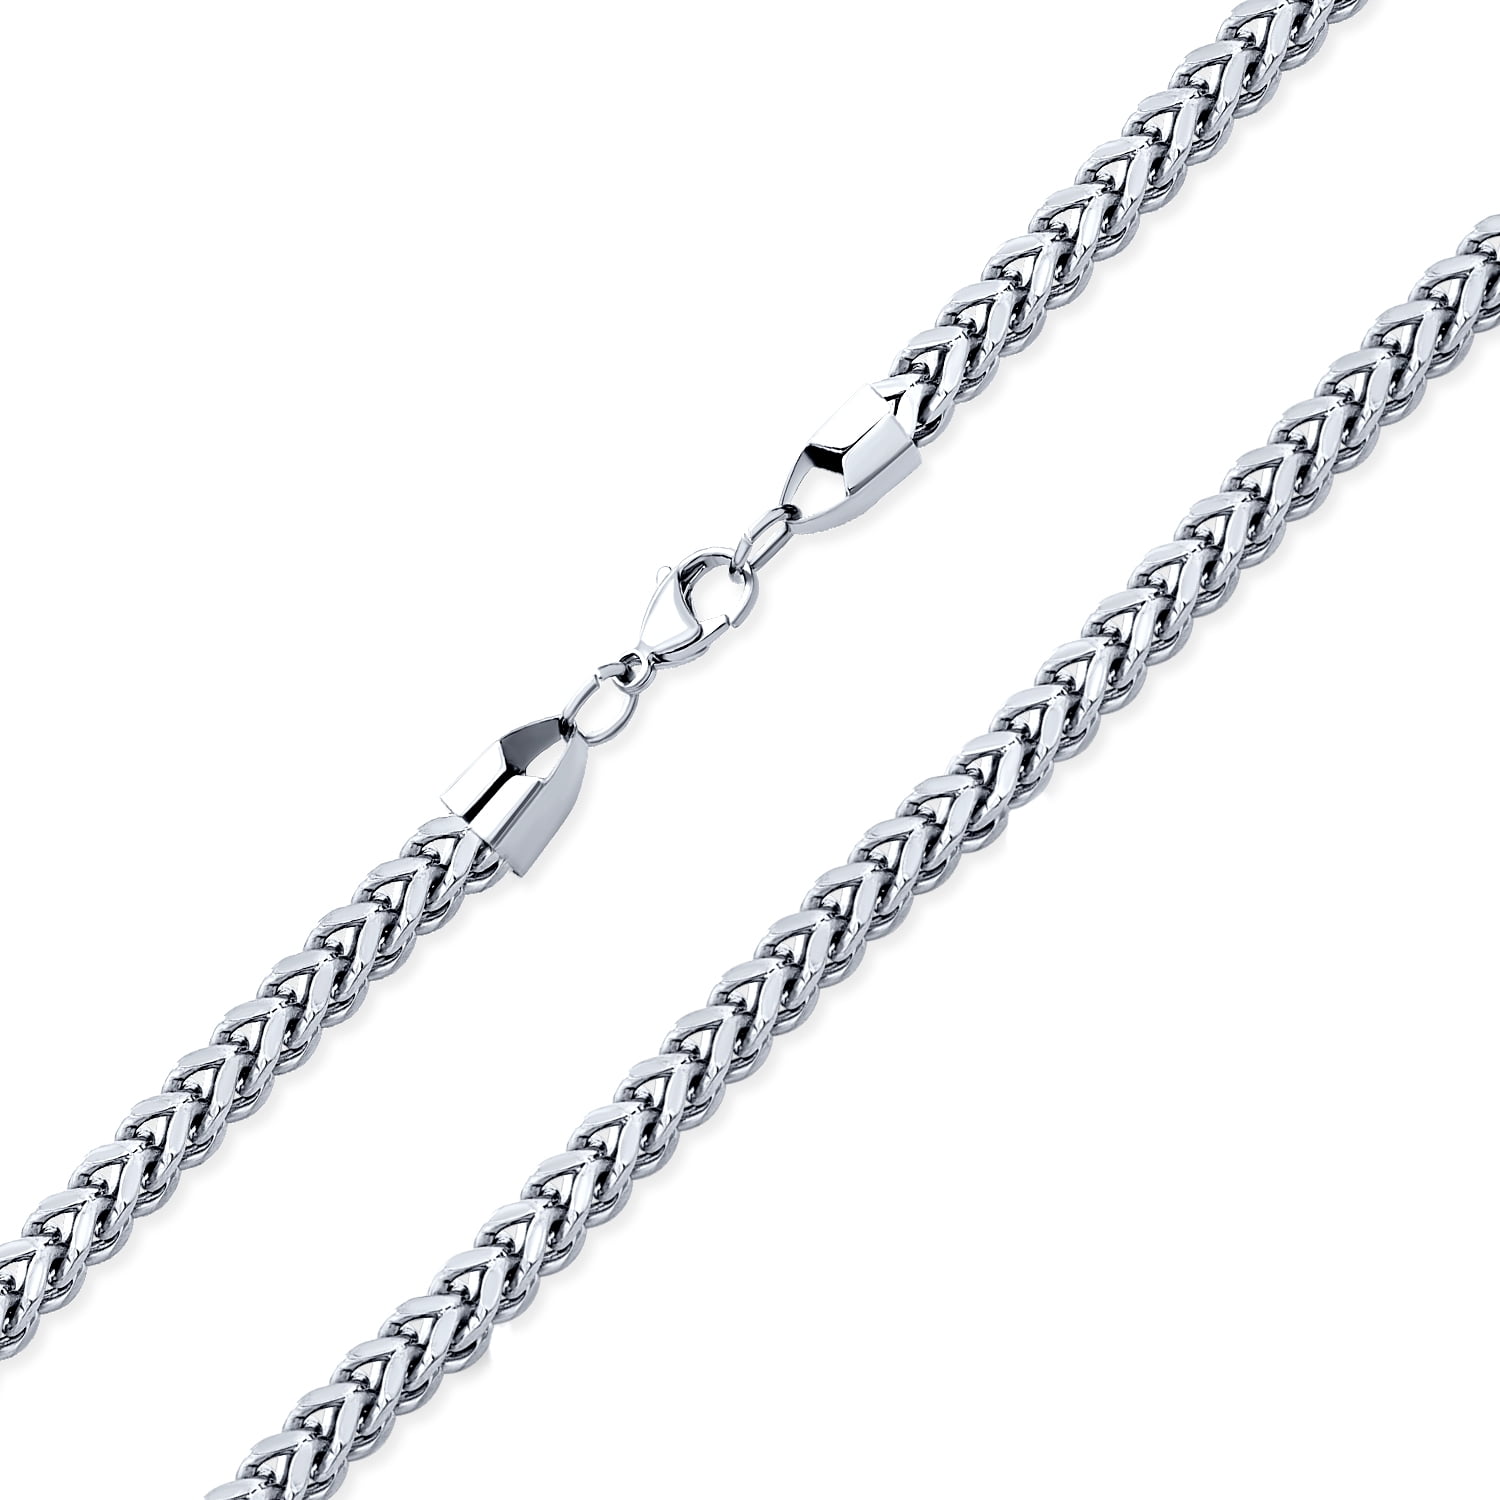 Necklace for Men Rugby Ball Necklaces Pendant Fitness For Men American Football Cloth Accessories Sports Jewelry Stainless Steel Chain